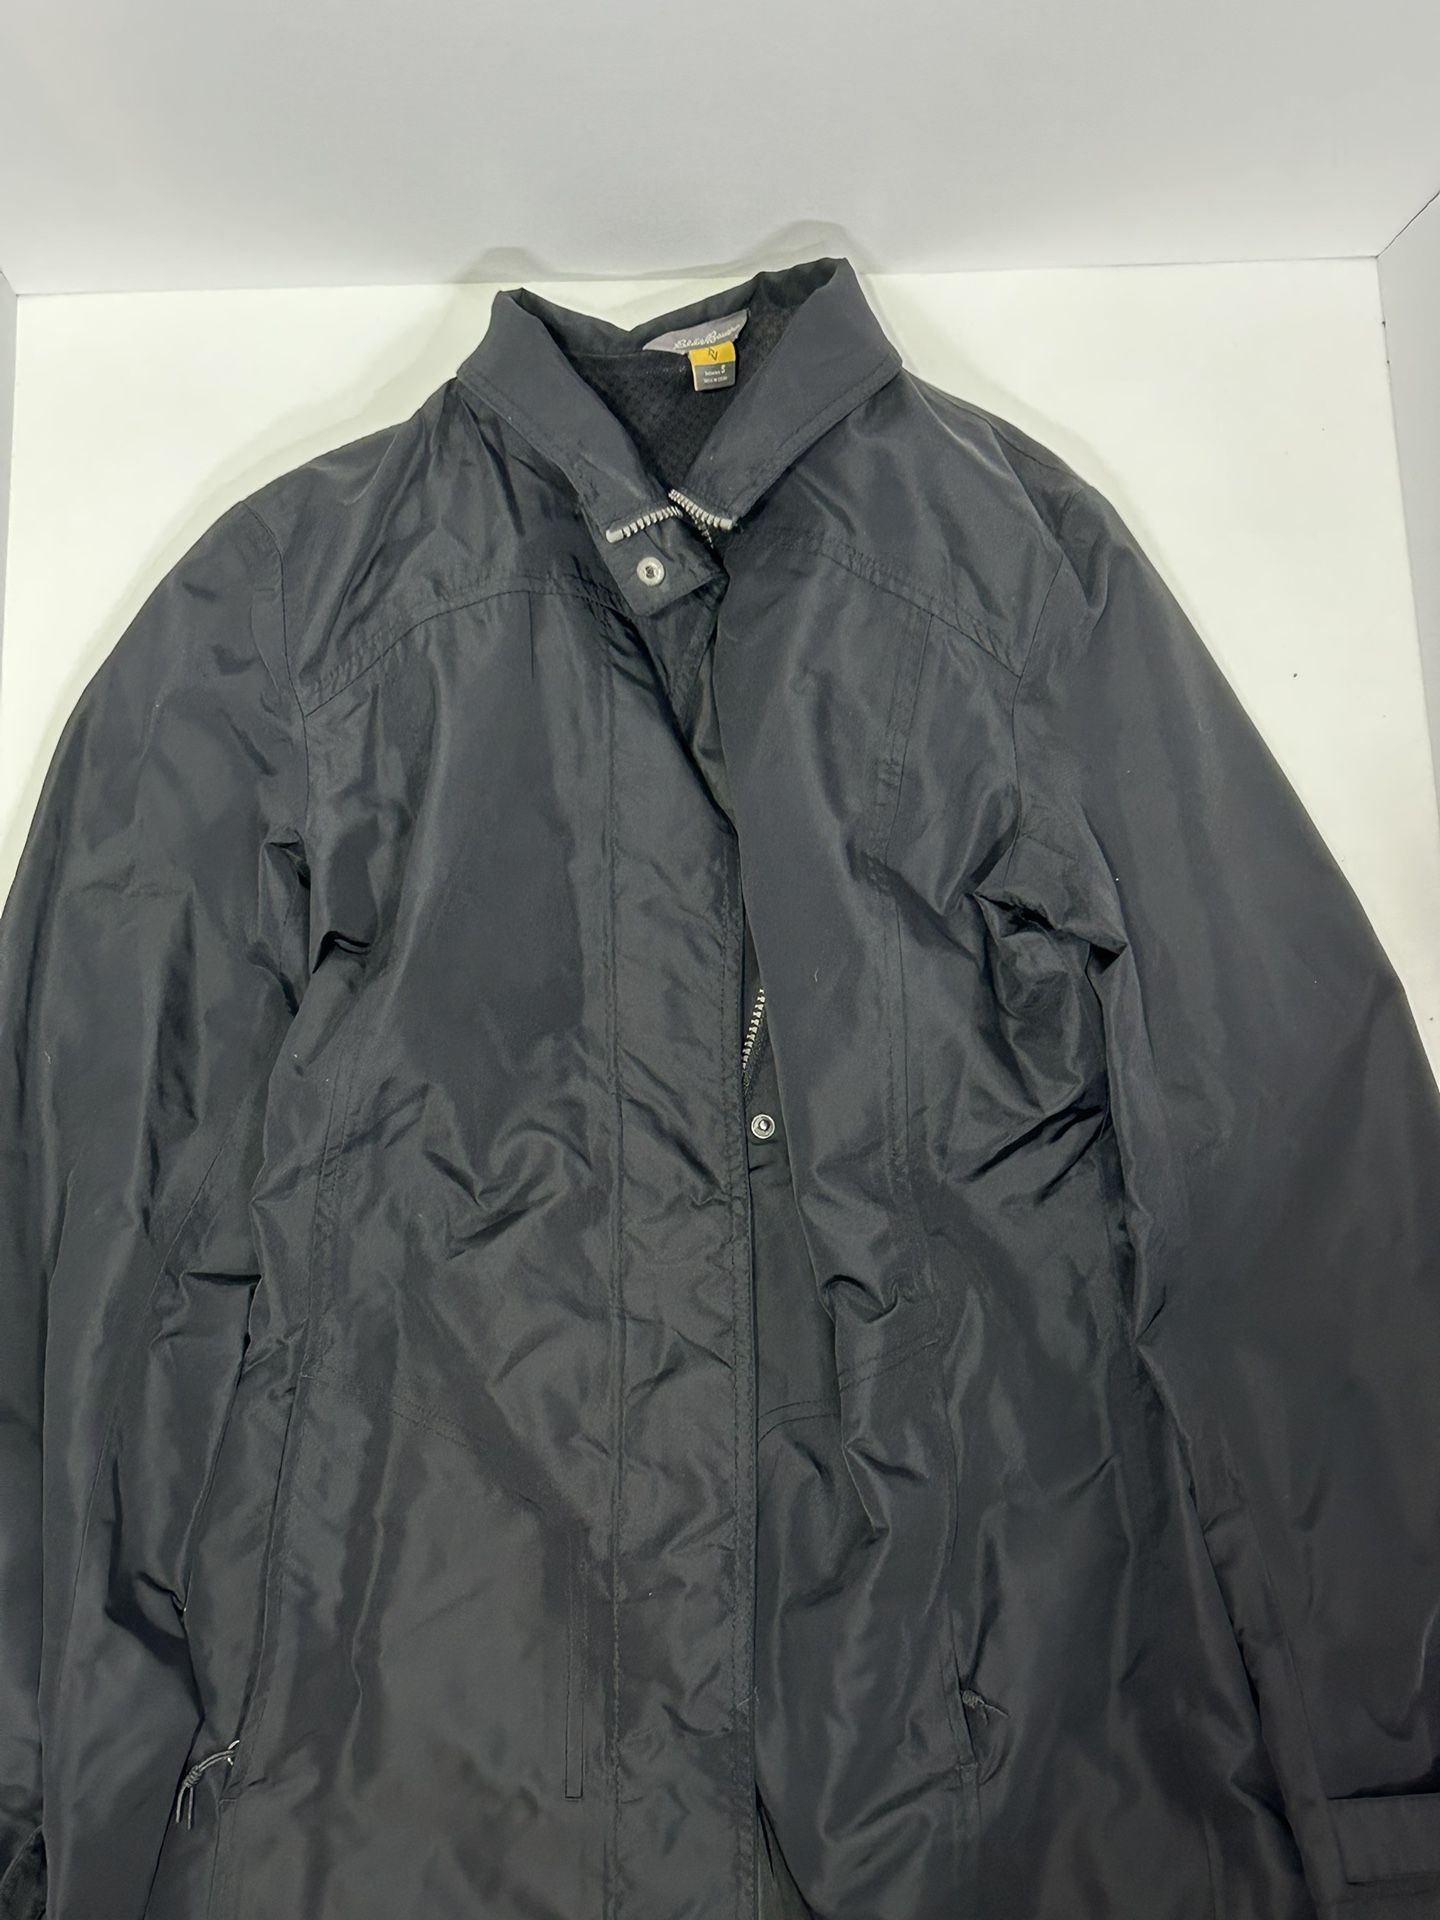 Women’s Eddie Bauer Water Proof Coat Brand New Size-Small